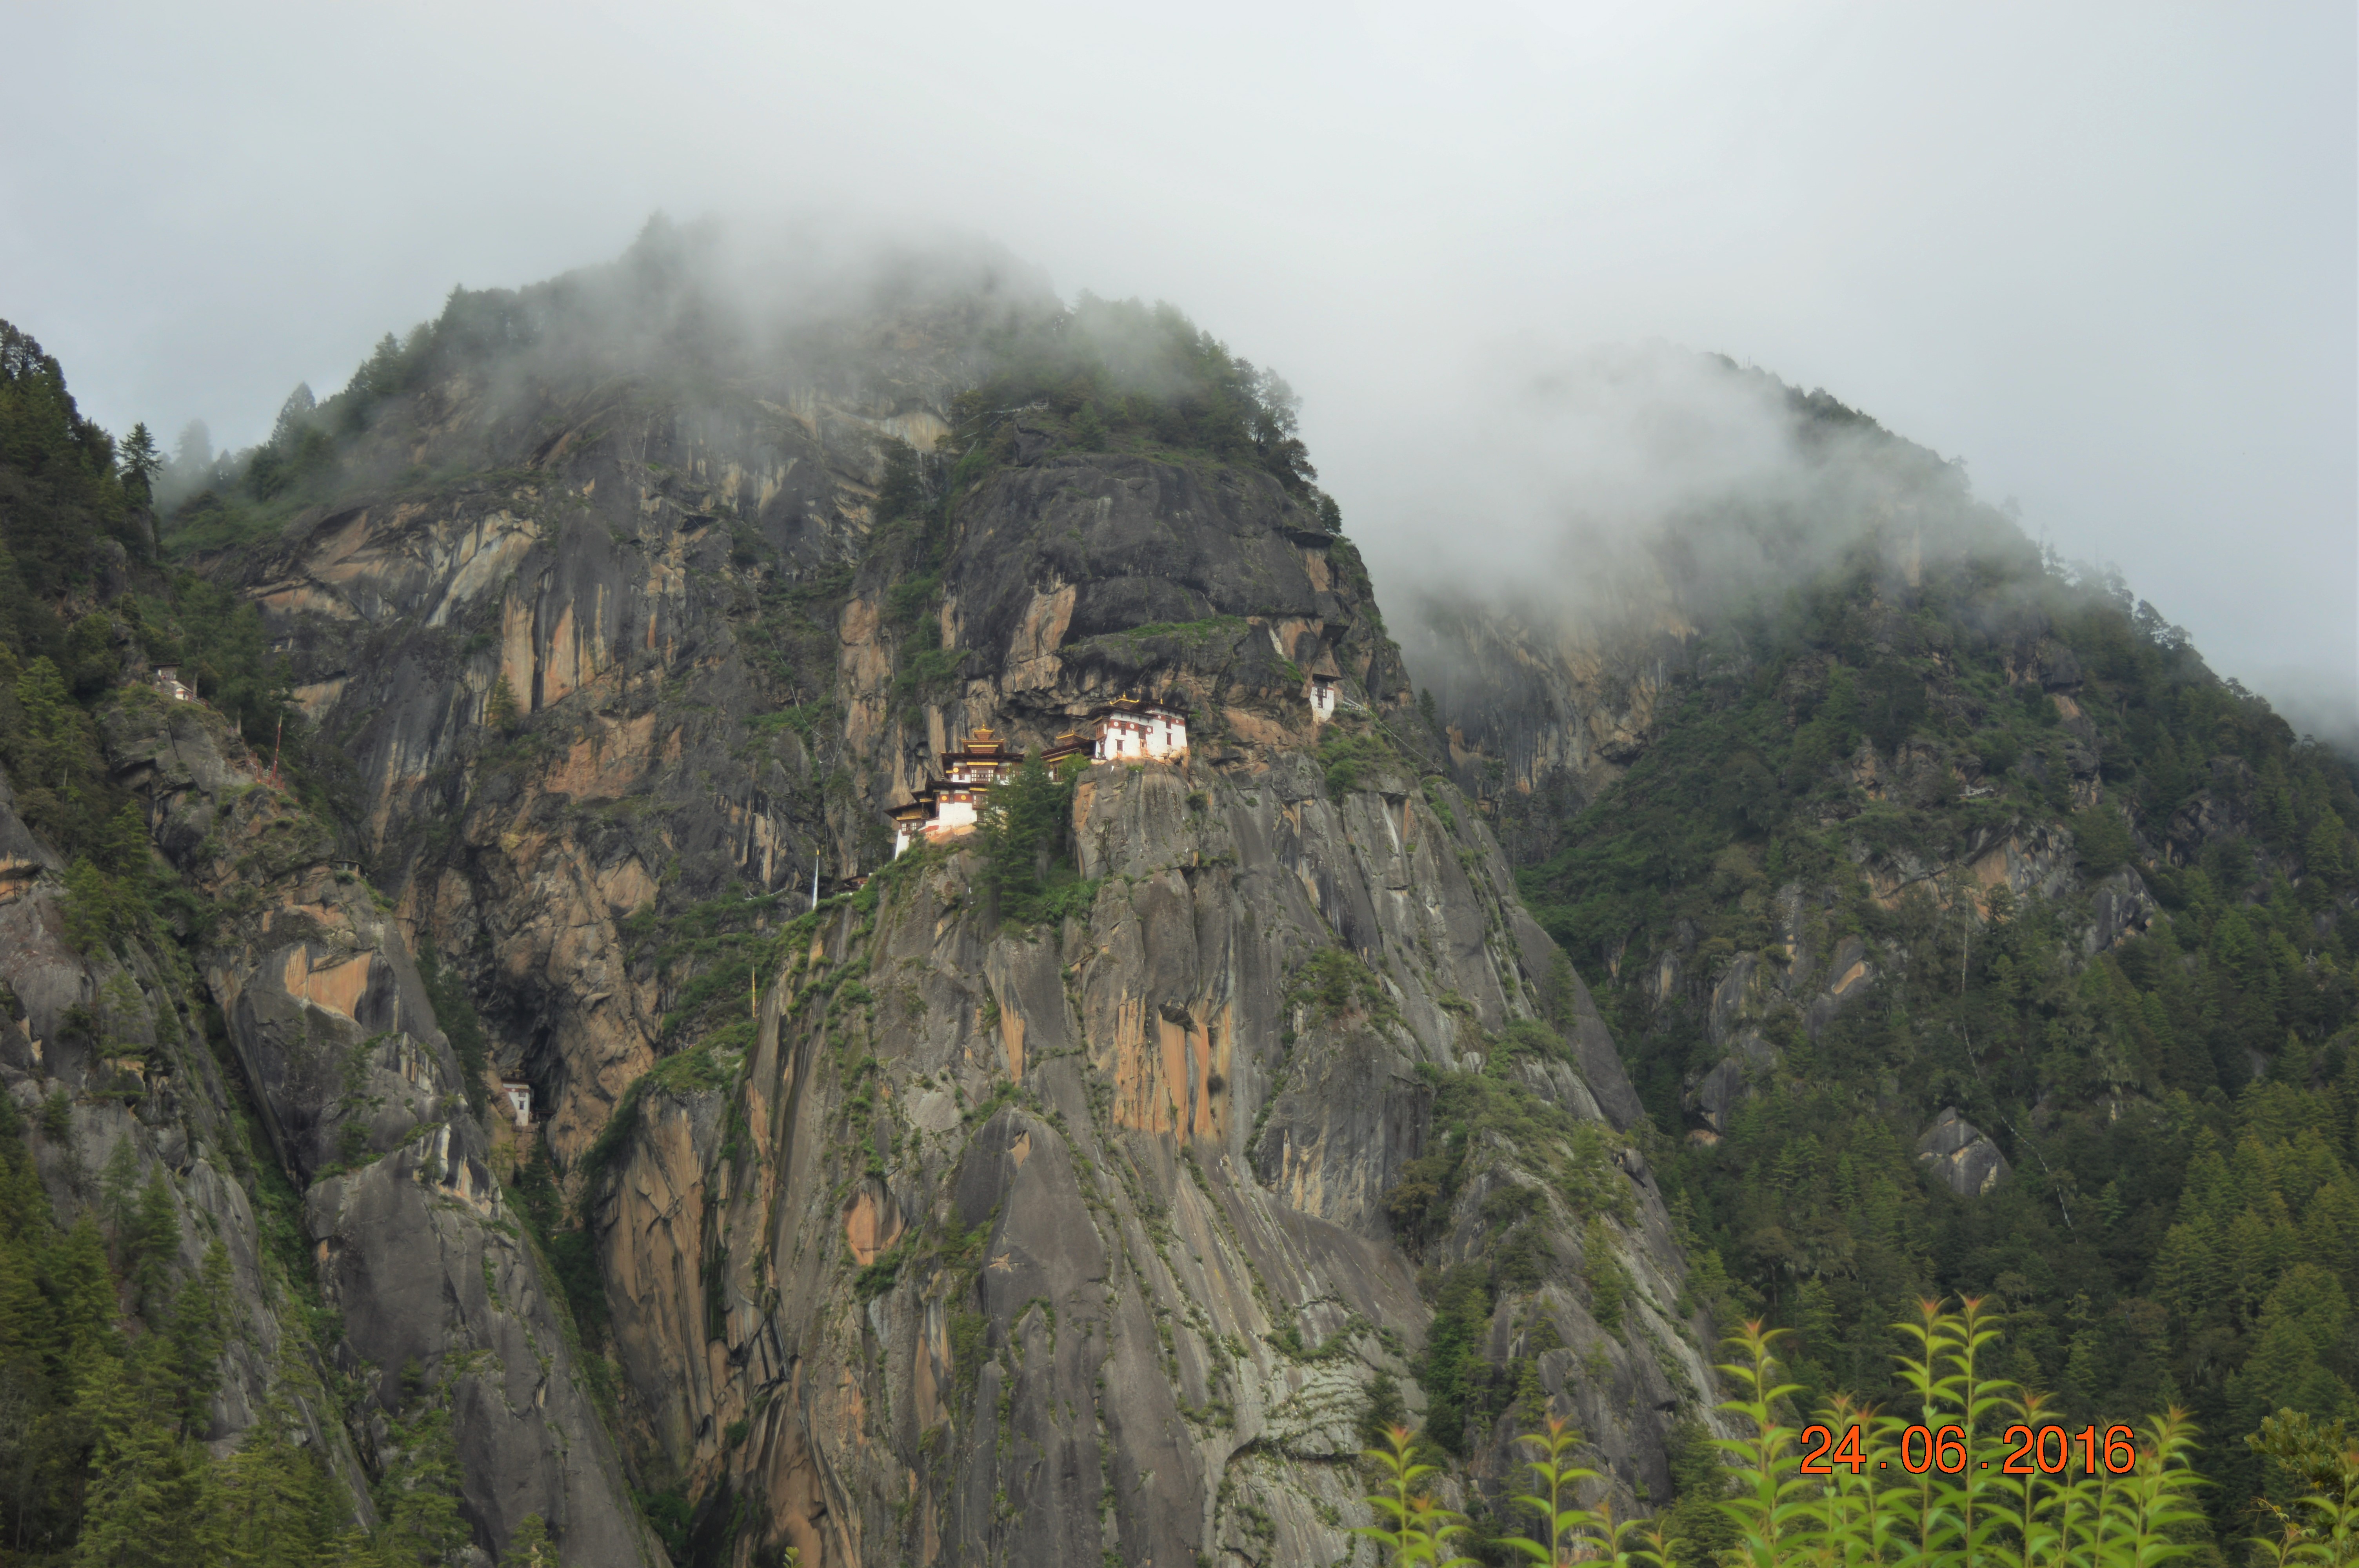 Bhutan!! There’s something magical about this place…